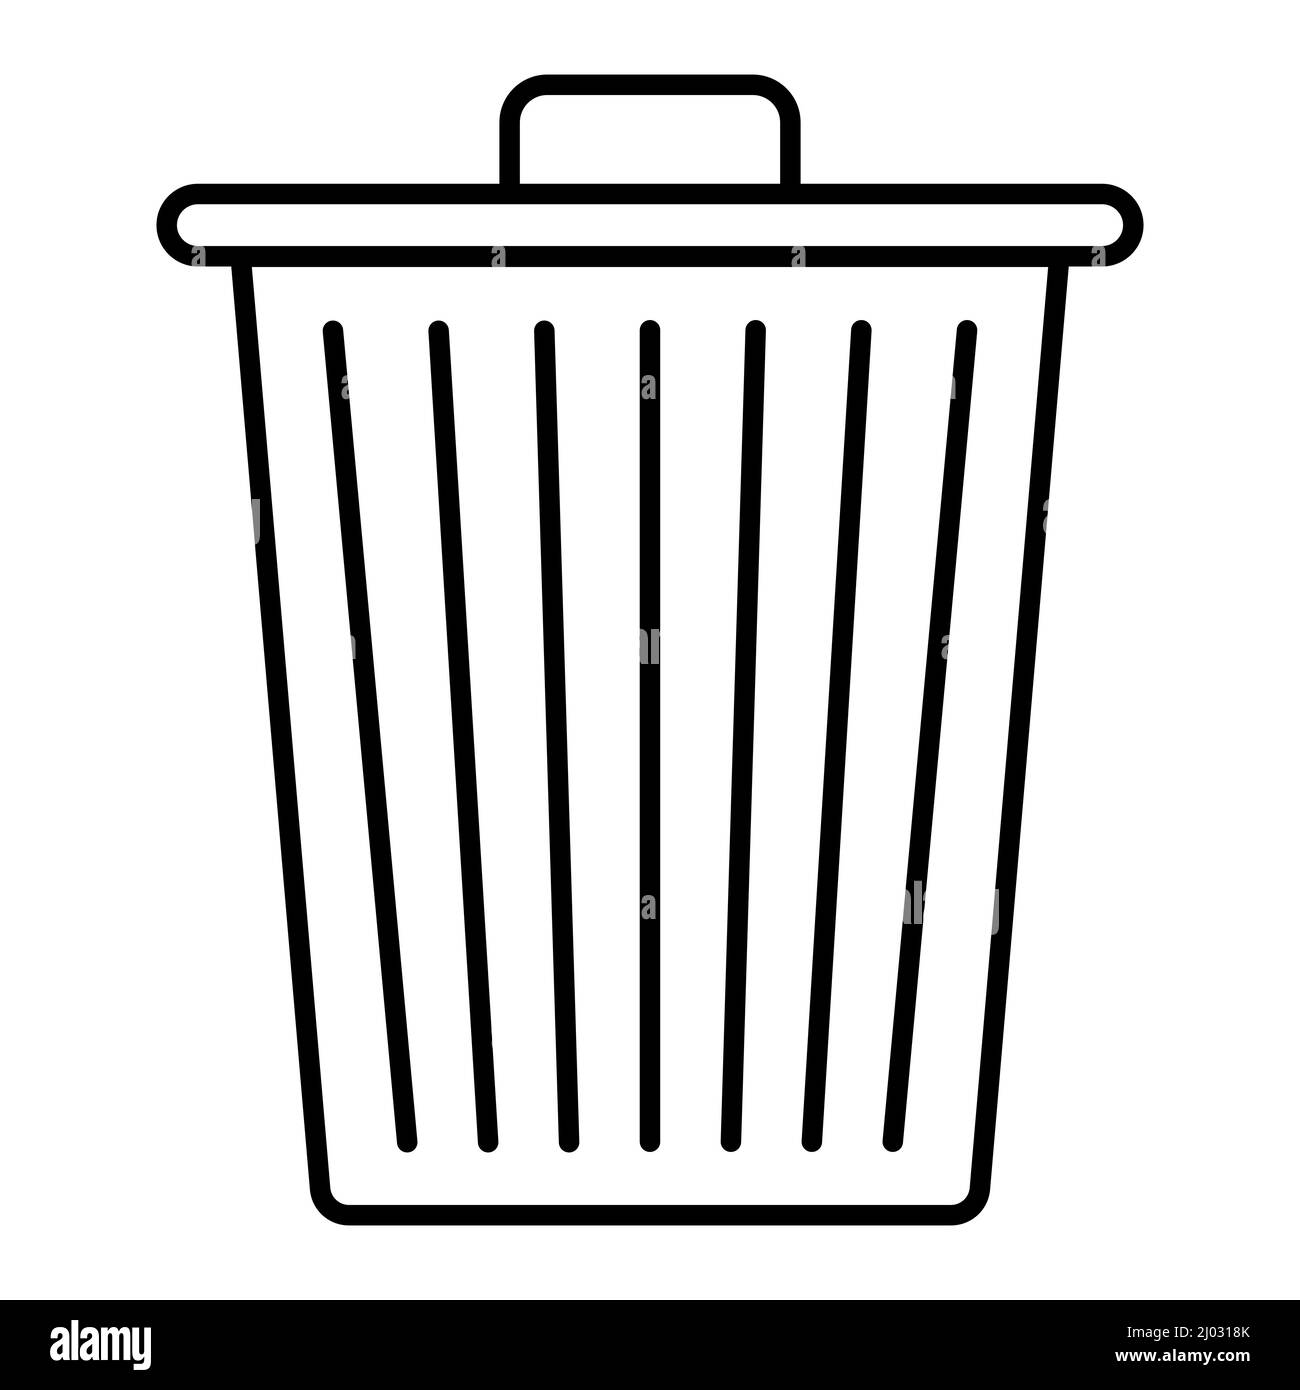 https://c8.alamy.com/comp/2J0318K/icon-trash-can-basket-for-collecting-sorting-and-recycling-garbage-2J0318K.jpg